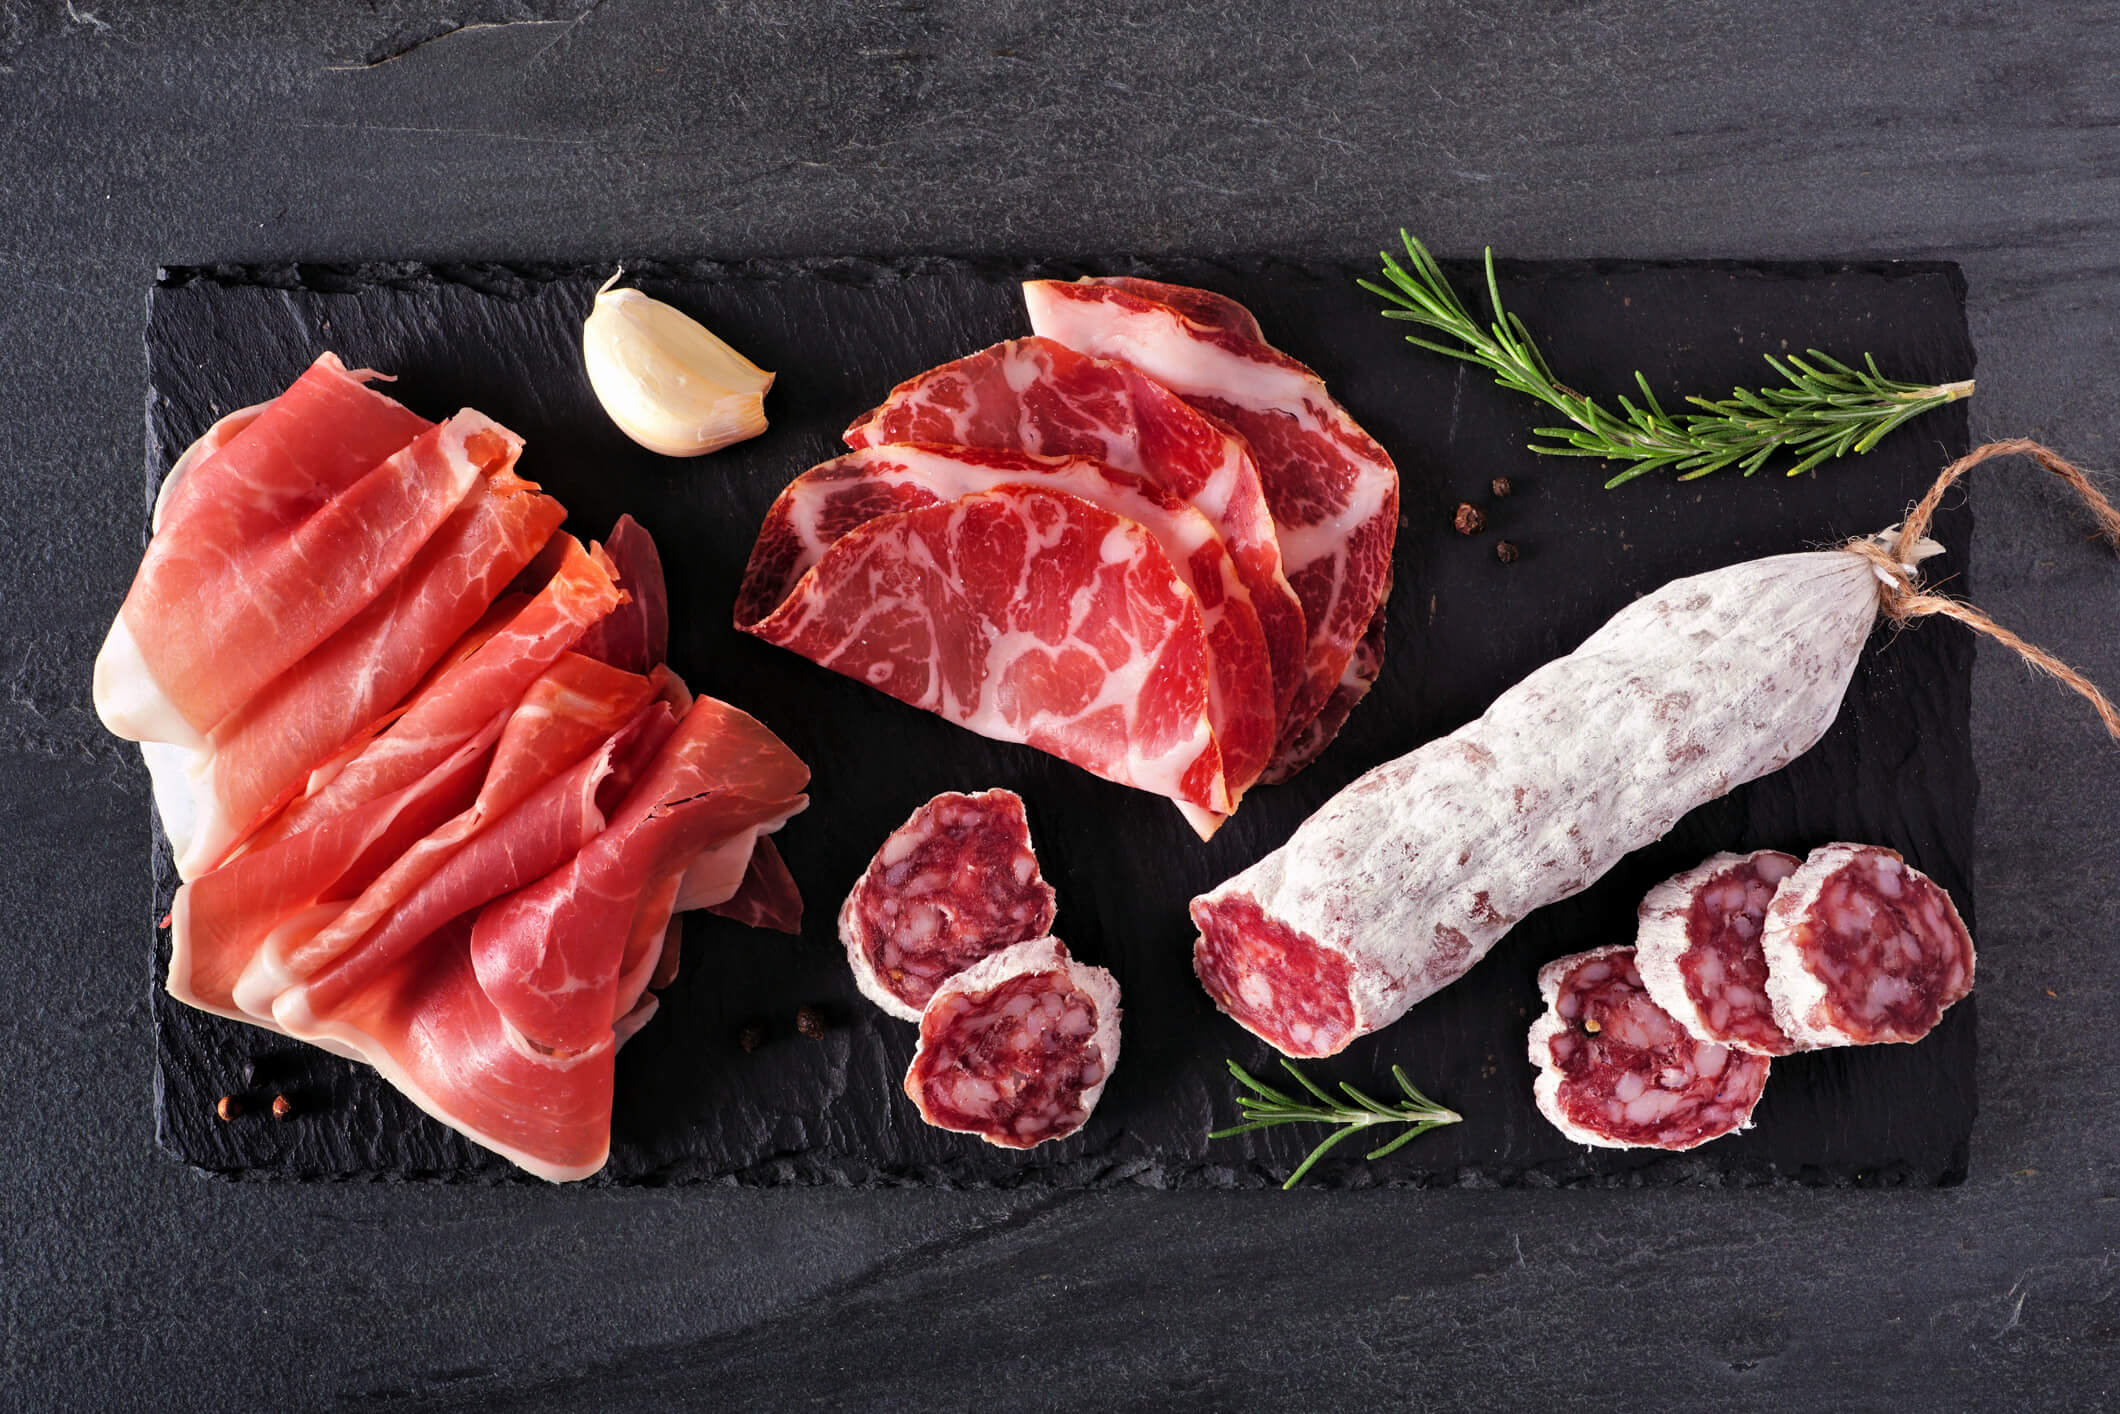 Meat and charcuterie add a smoky, hearty flavor.